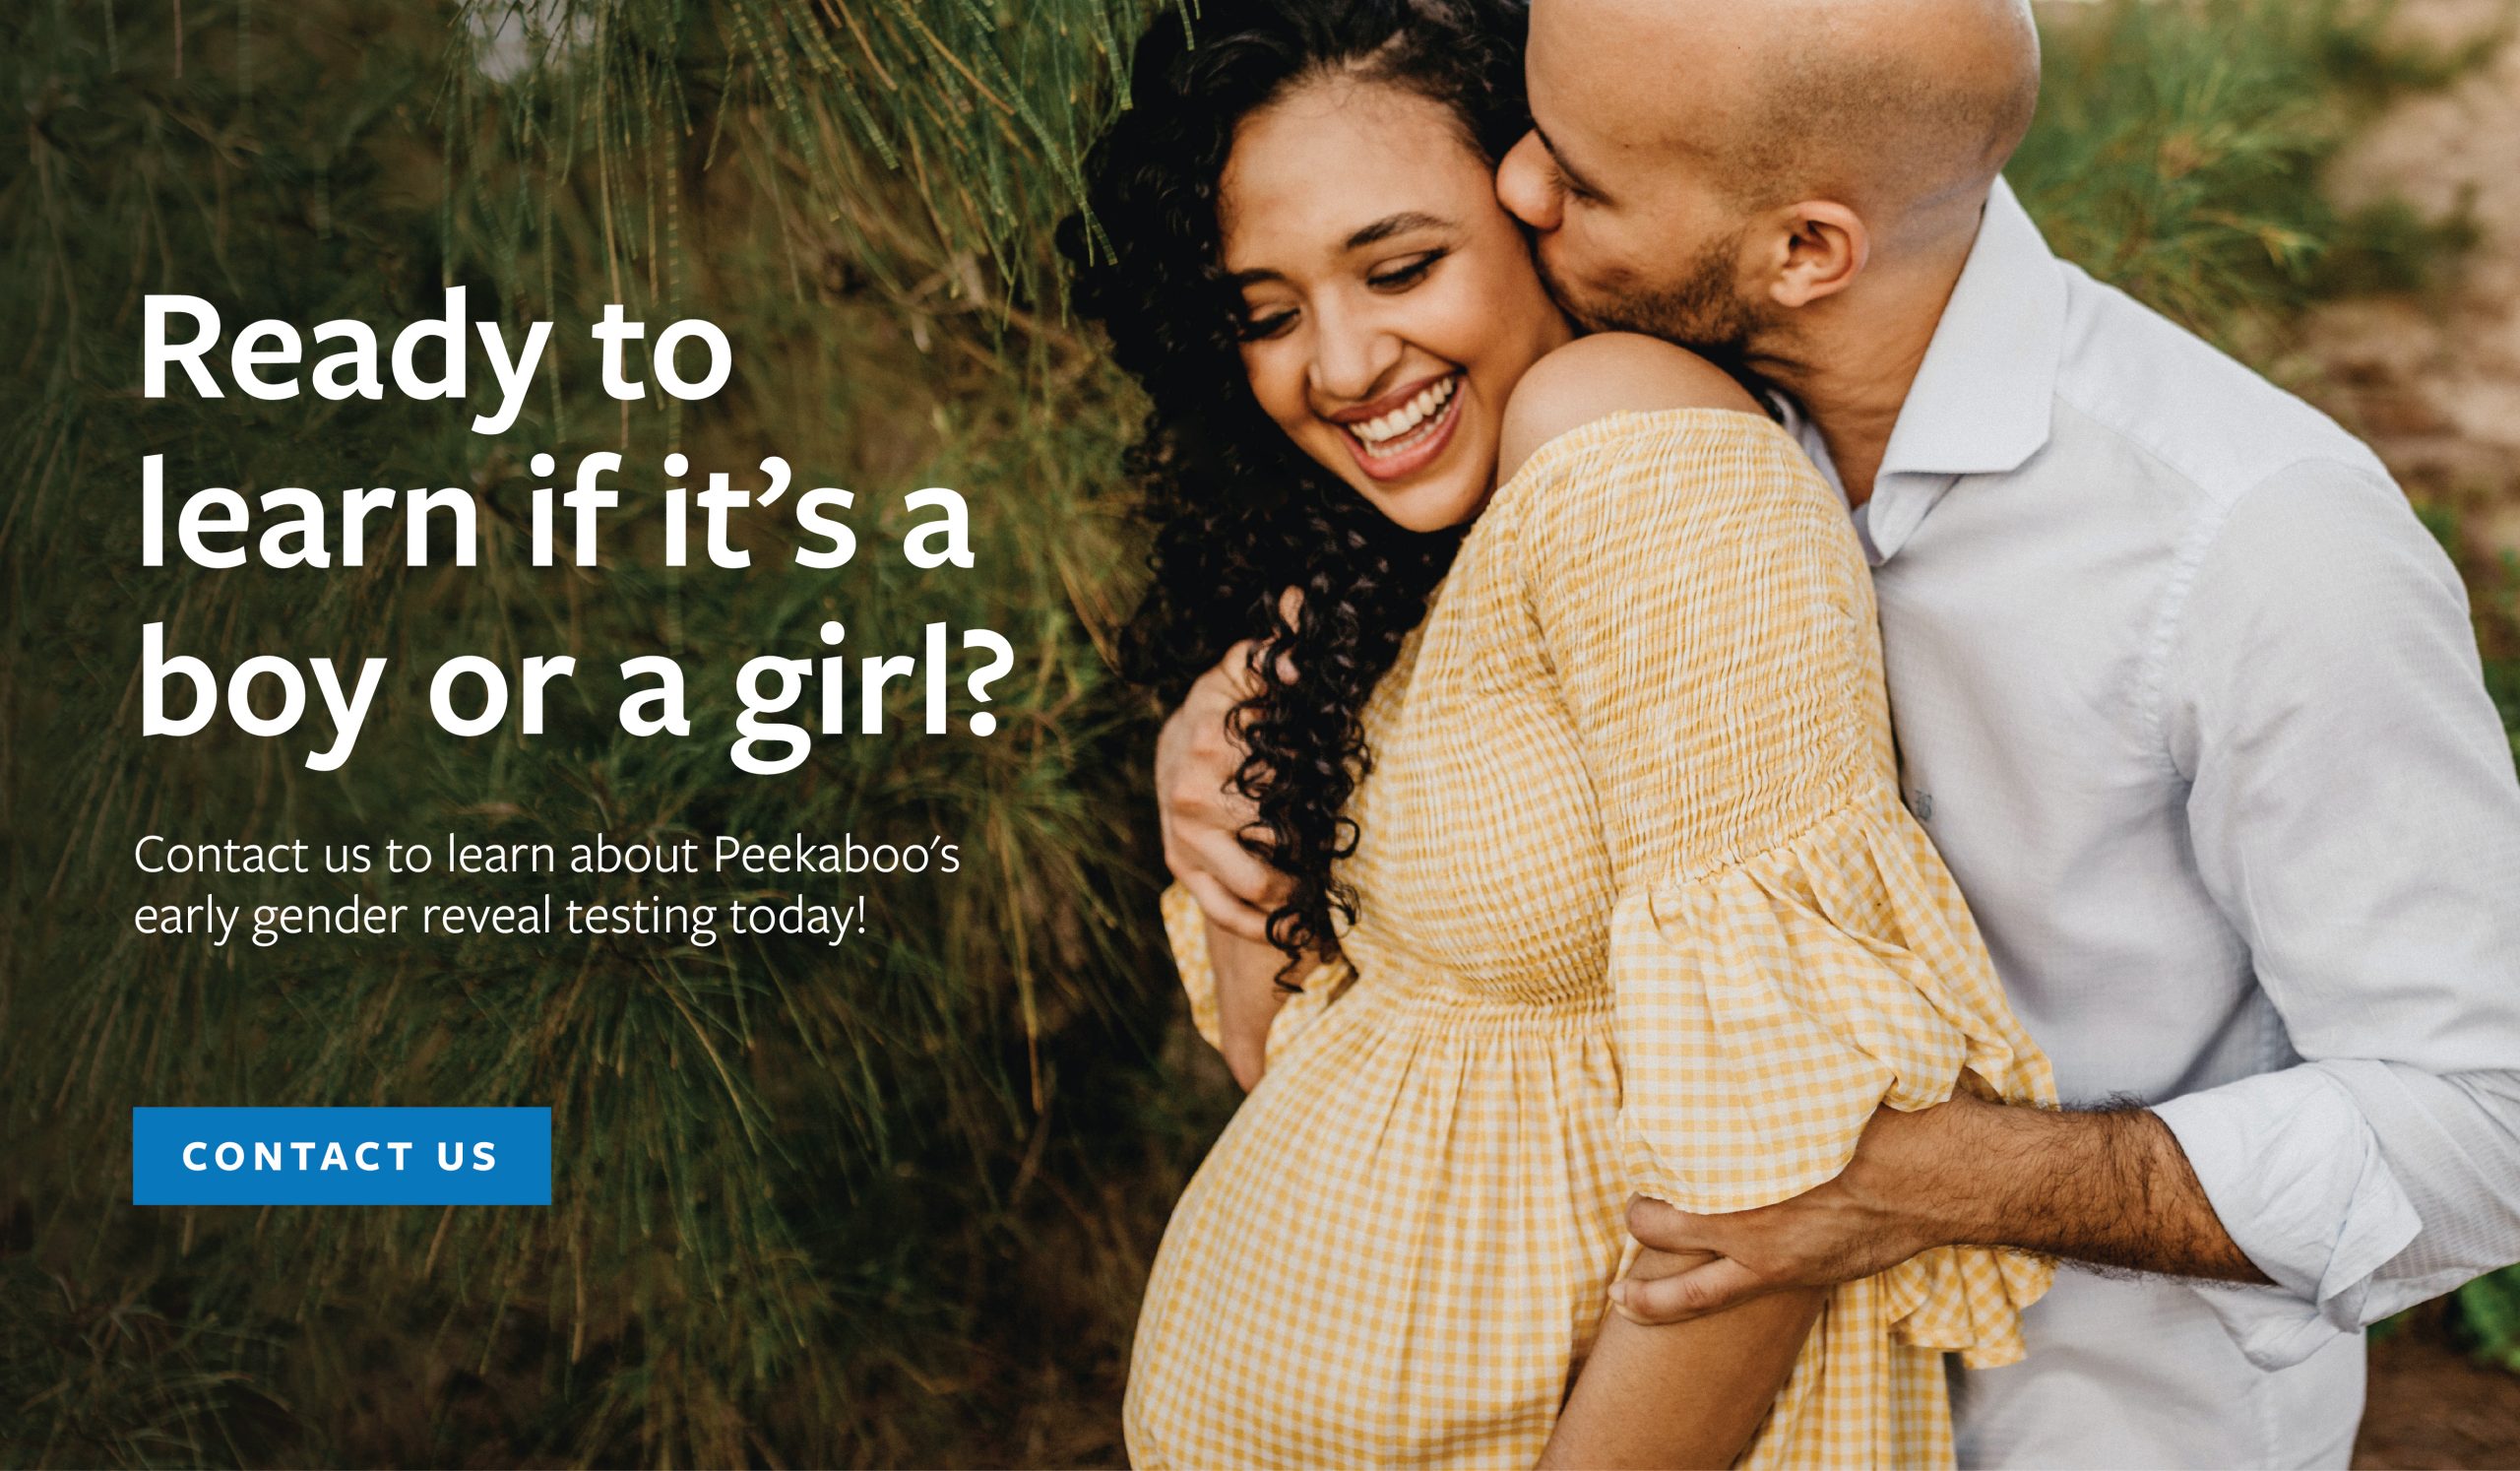 Ready to learn if it’s a boy or a girl? Contact us to learn about Peekaboo's early gender reveal testing today!